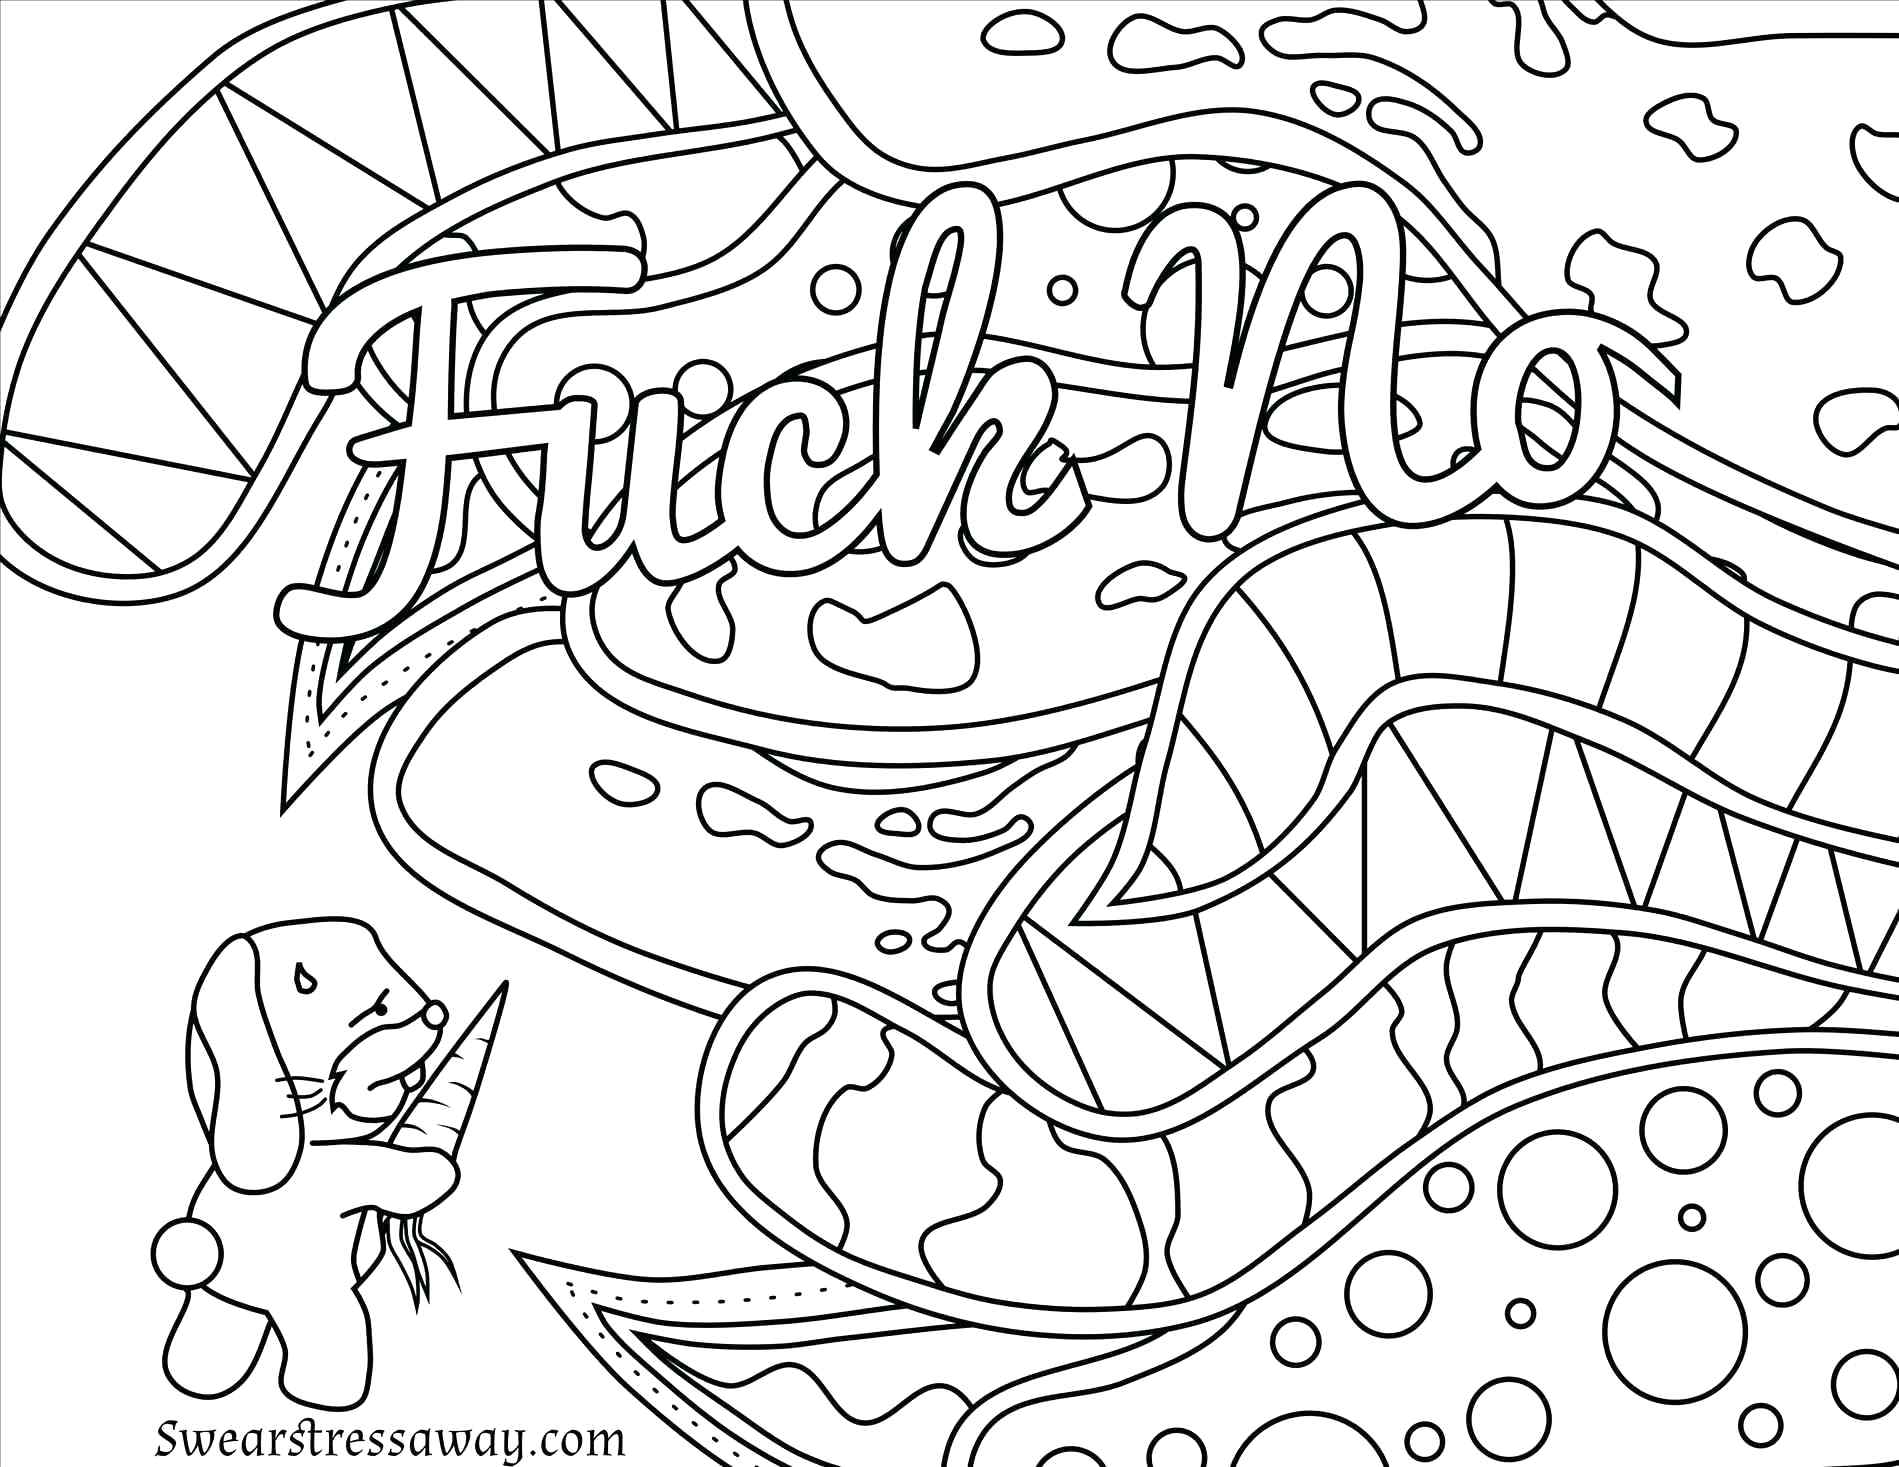 Coloring Pages For Boyfriend at GetColorings.com | Free printable ...